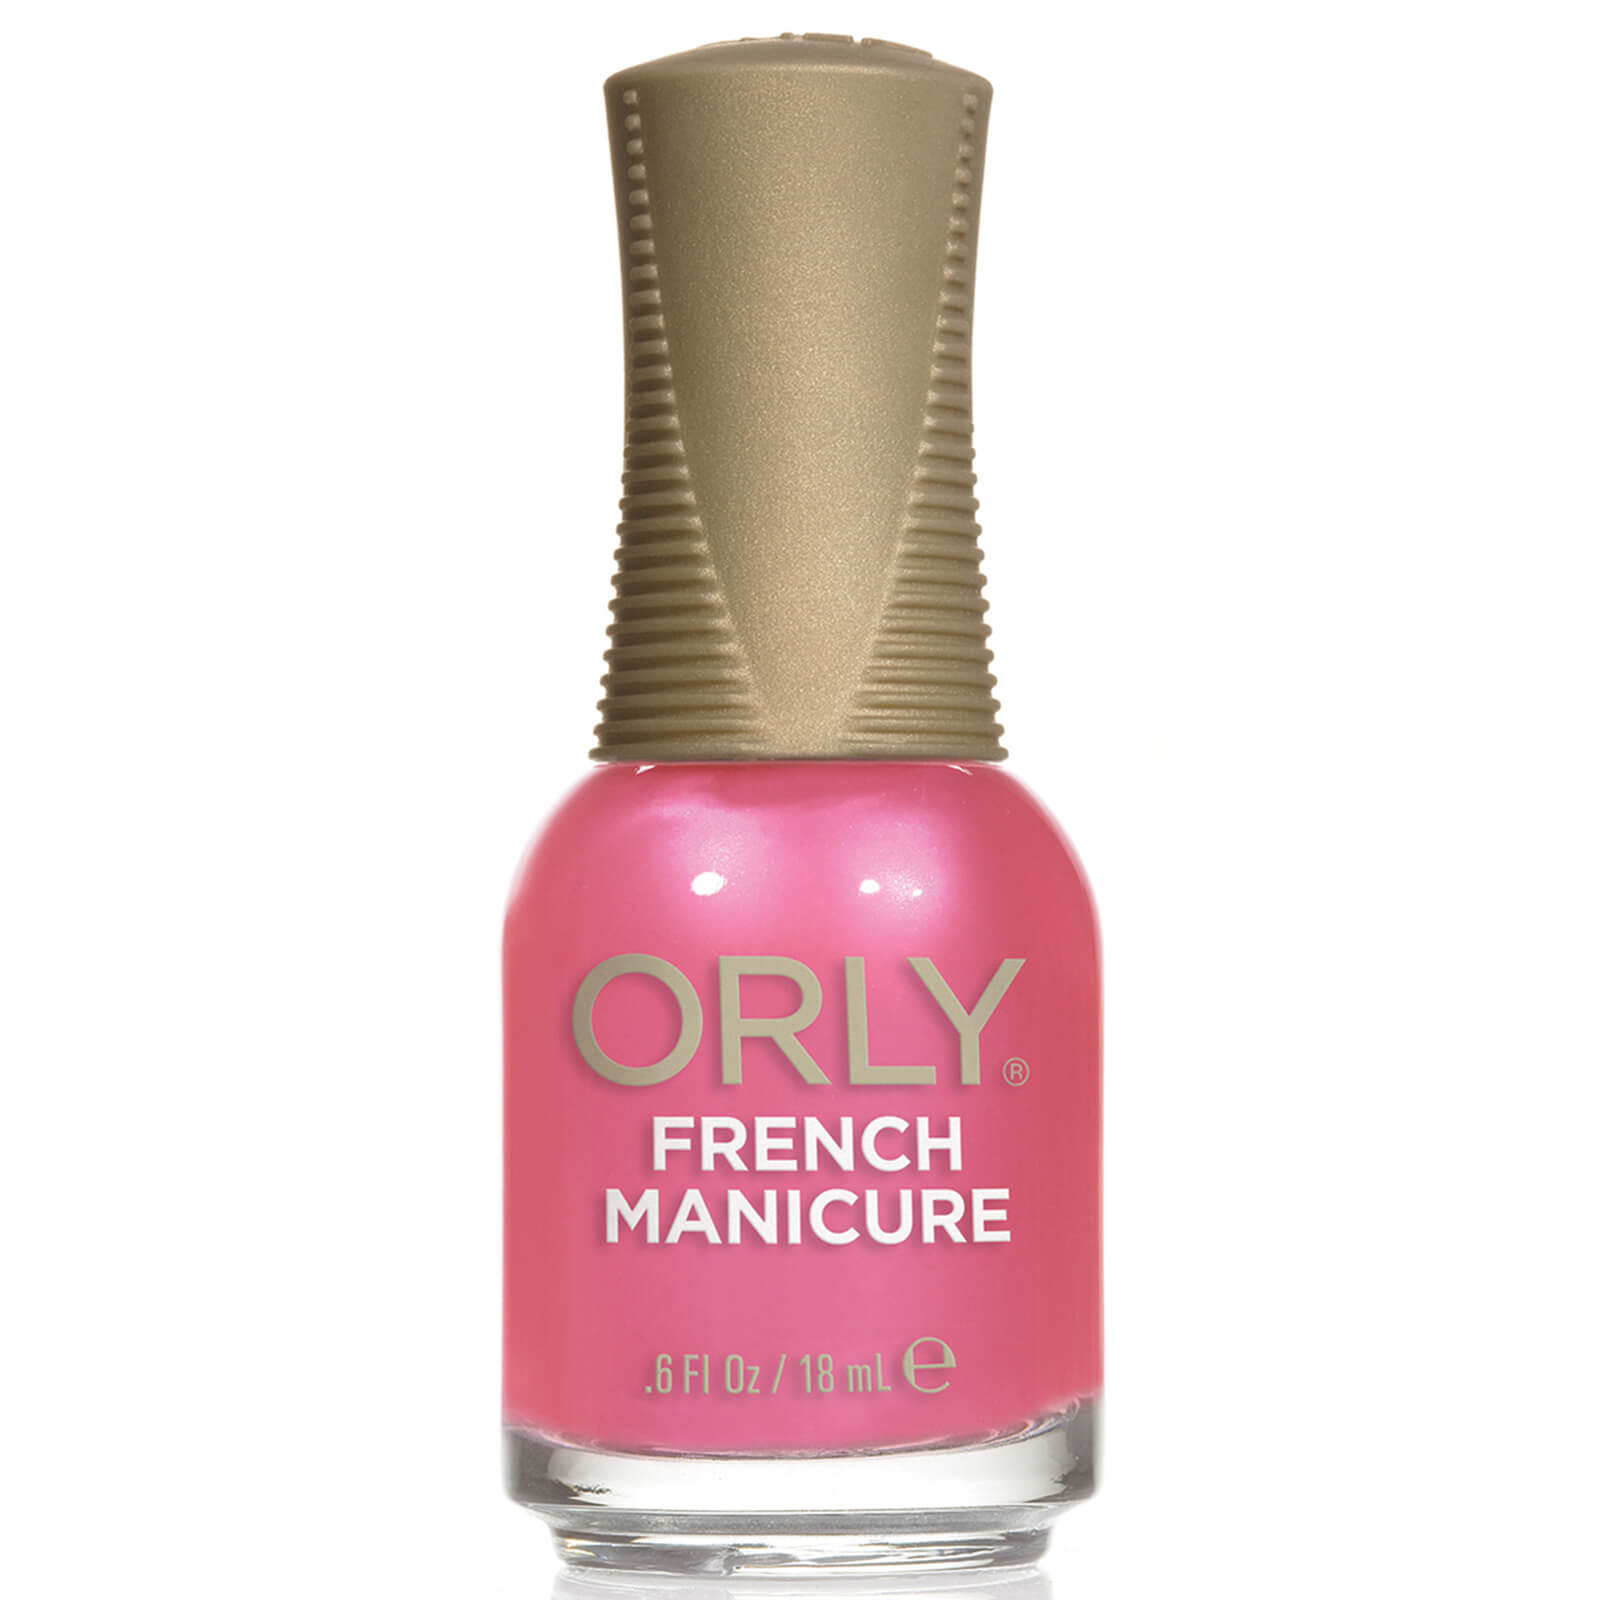 Orly Nail Lacquer French Manicure 18ml (Various Shades) – Des Fleurs lookfantastic.com imagine